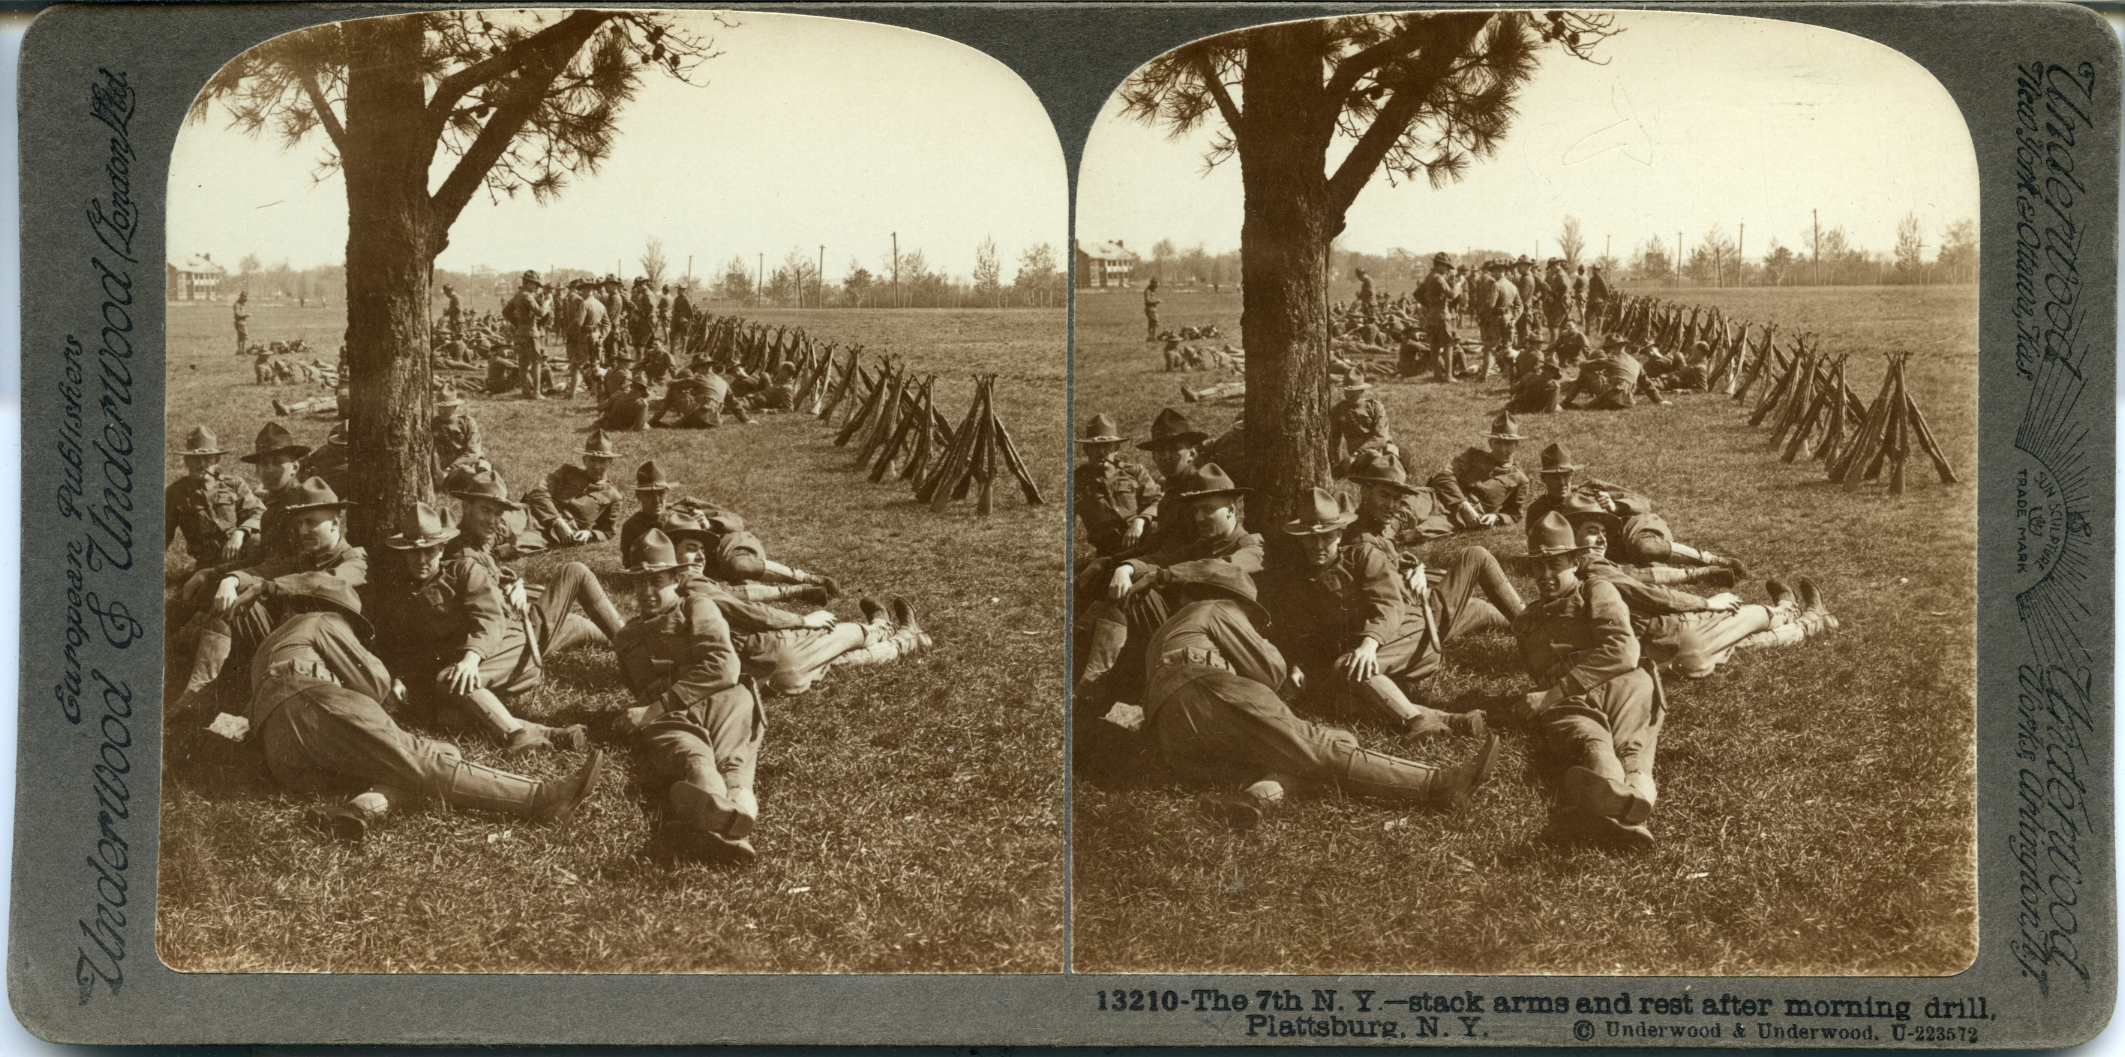 The 7th New York - stack arms and rest after morning drill, Plattsburg, N.Y.